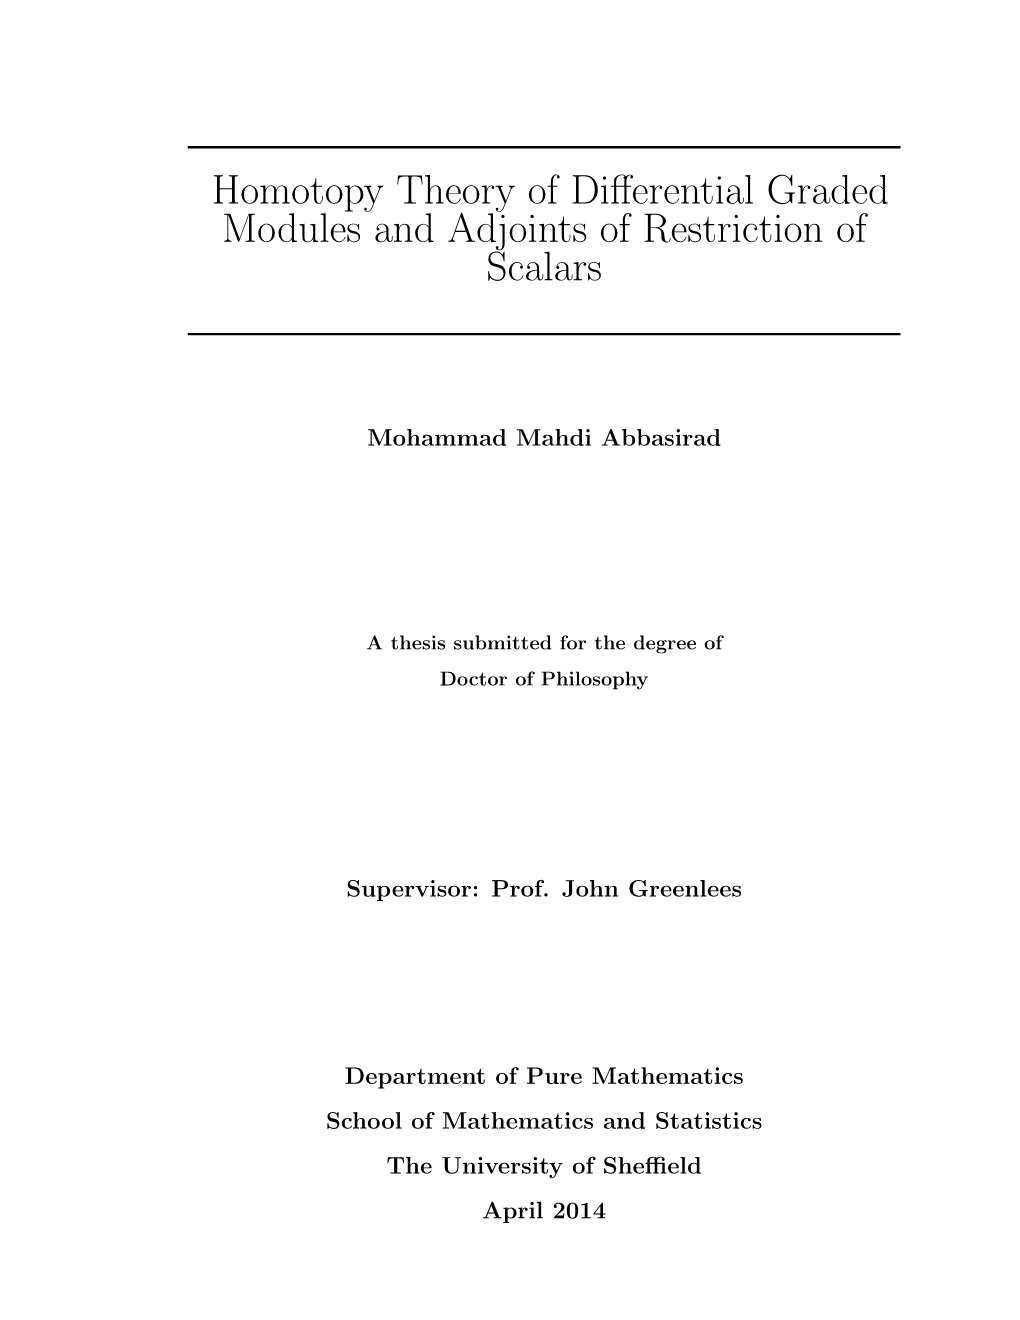 Homotopy Theory of Differential Graded Modules and Adjoints Of